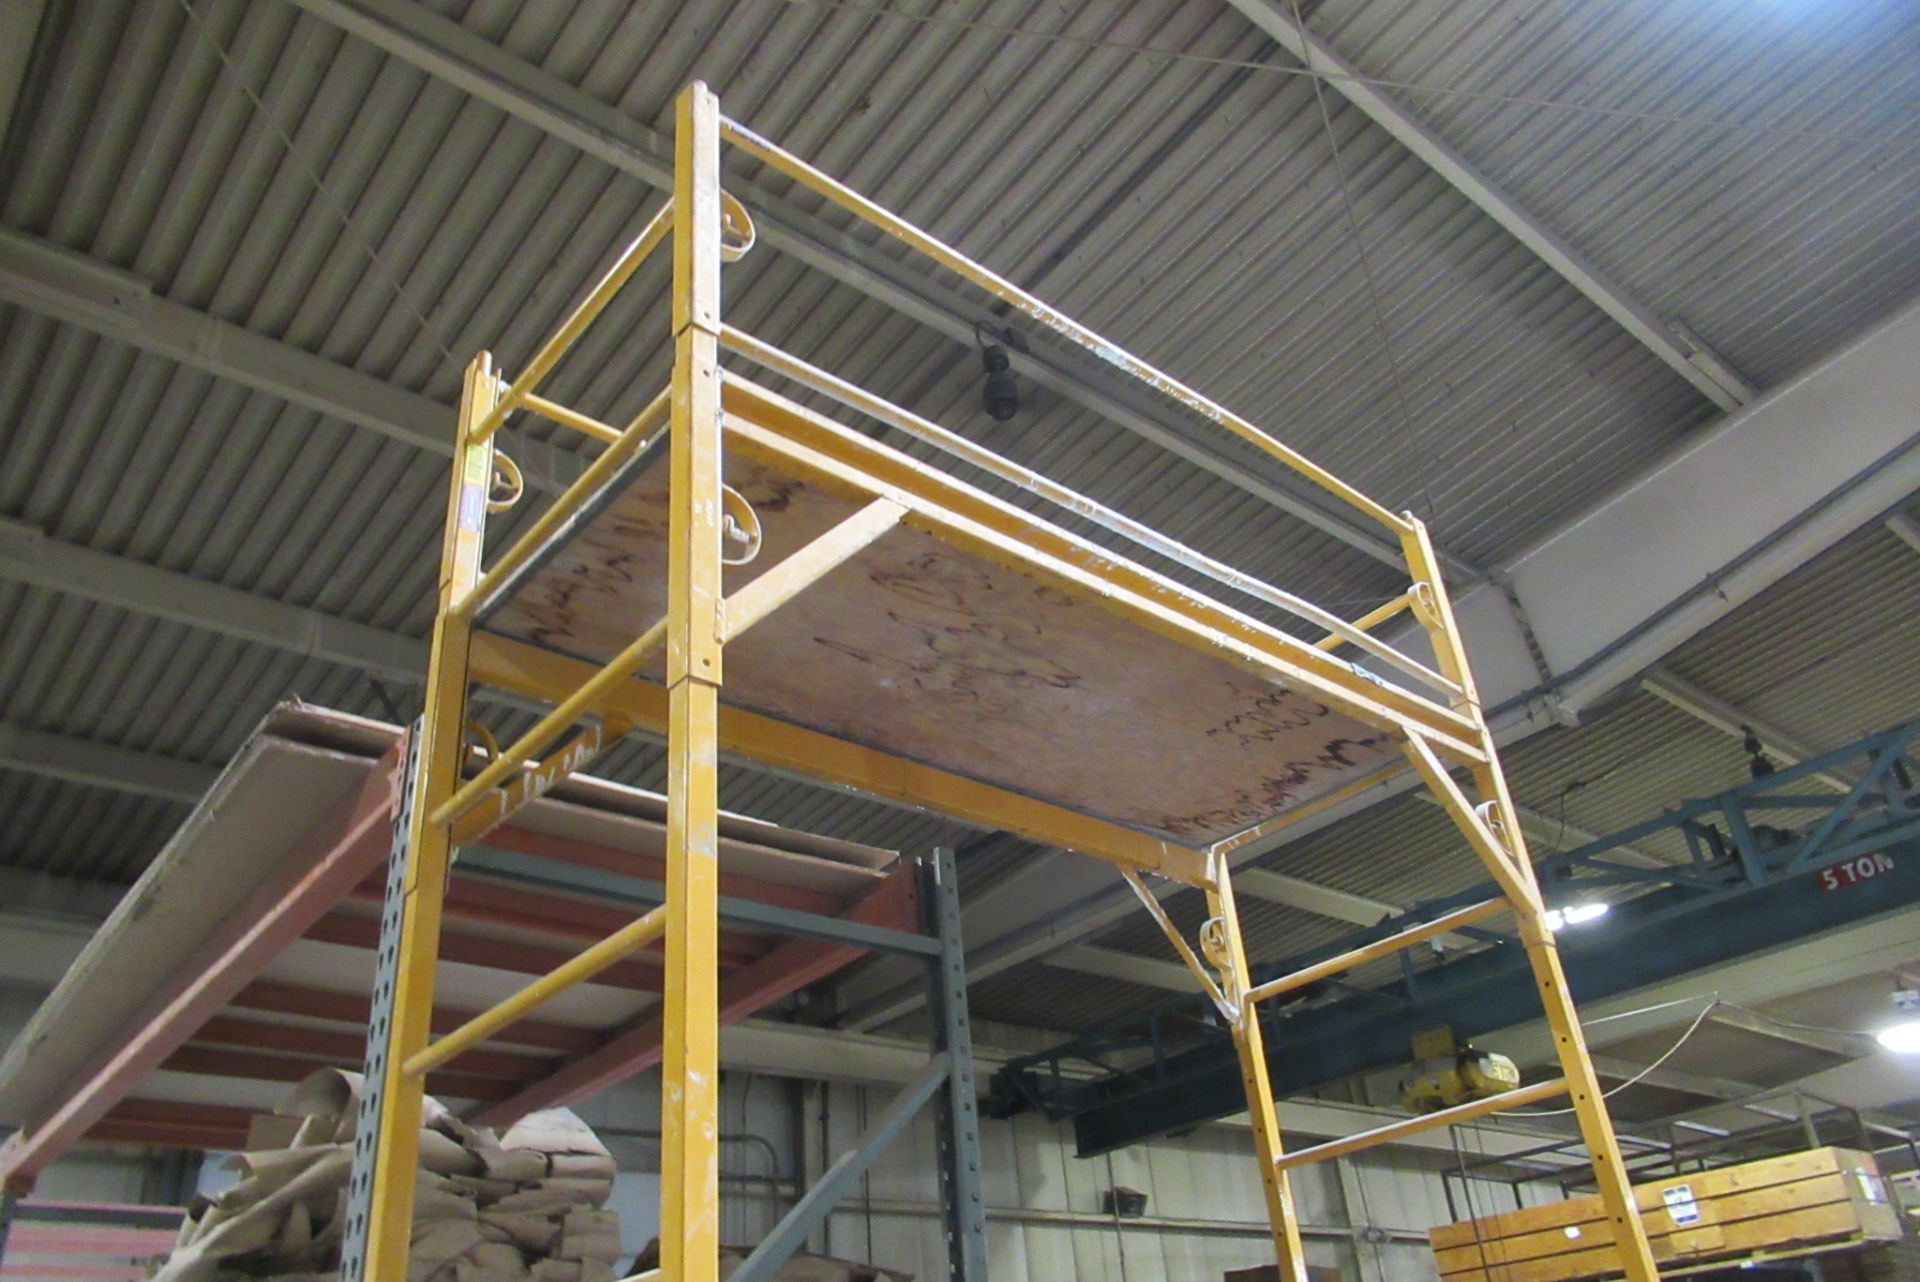 Bakers Scaffolding (2 Planks, 4 Uprights & 4 Cross Beams) - Image 2 of 2